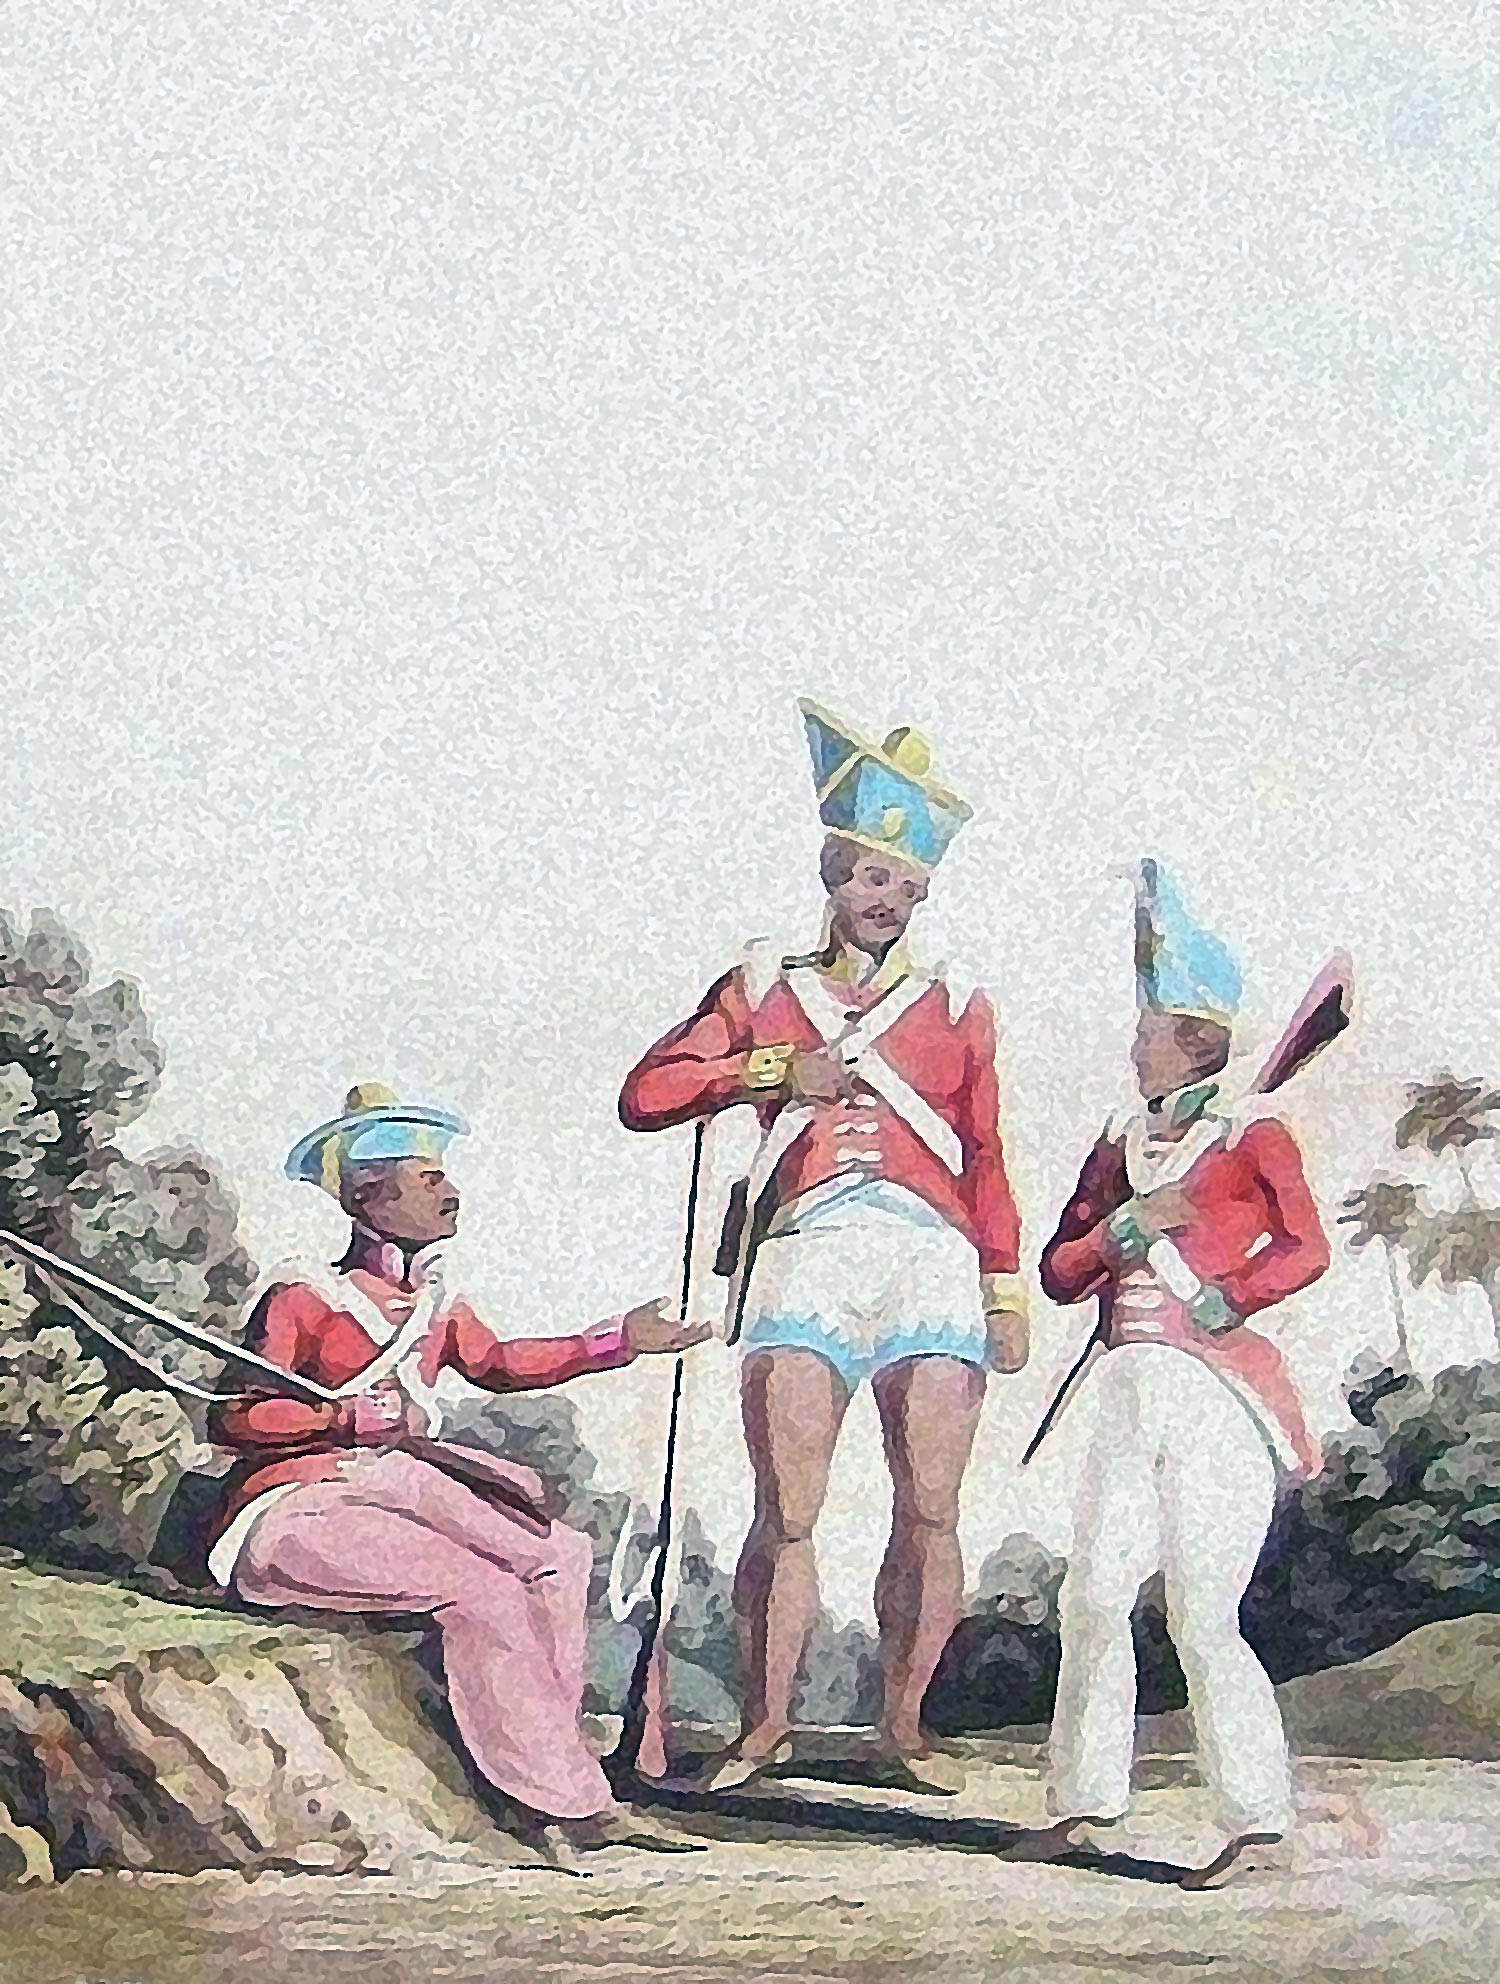 Image shows a coloured artwork depicting the Sepoys of the Bombay, Bengal and Madras presidencies. It was created by by Lieutenant Colonel George Fitzclarance in 1819 A.D.